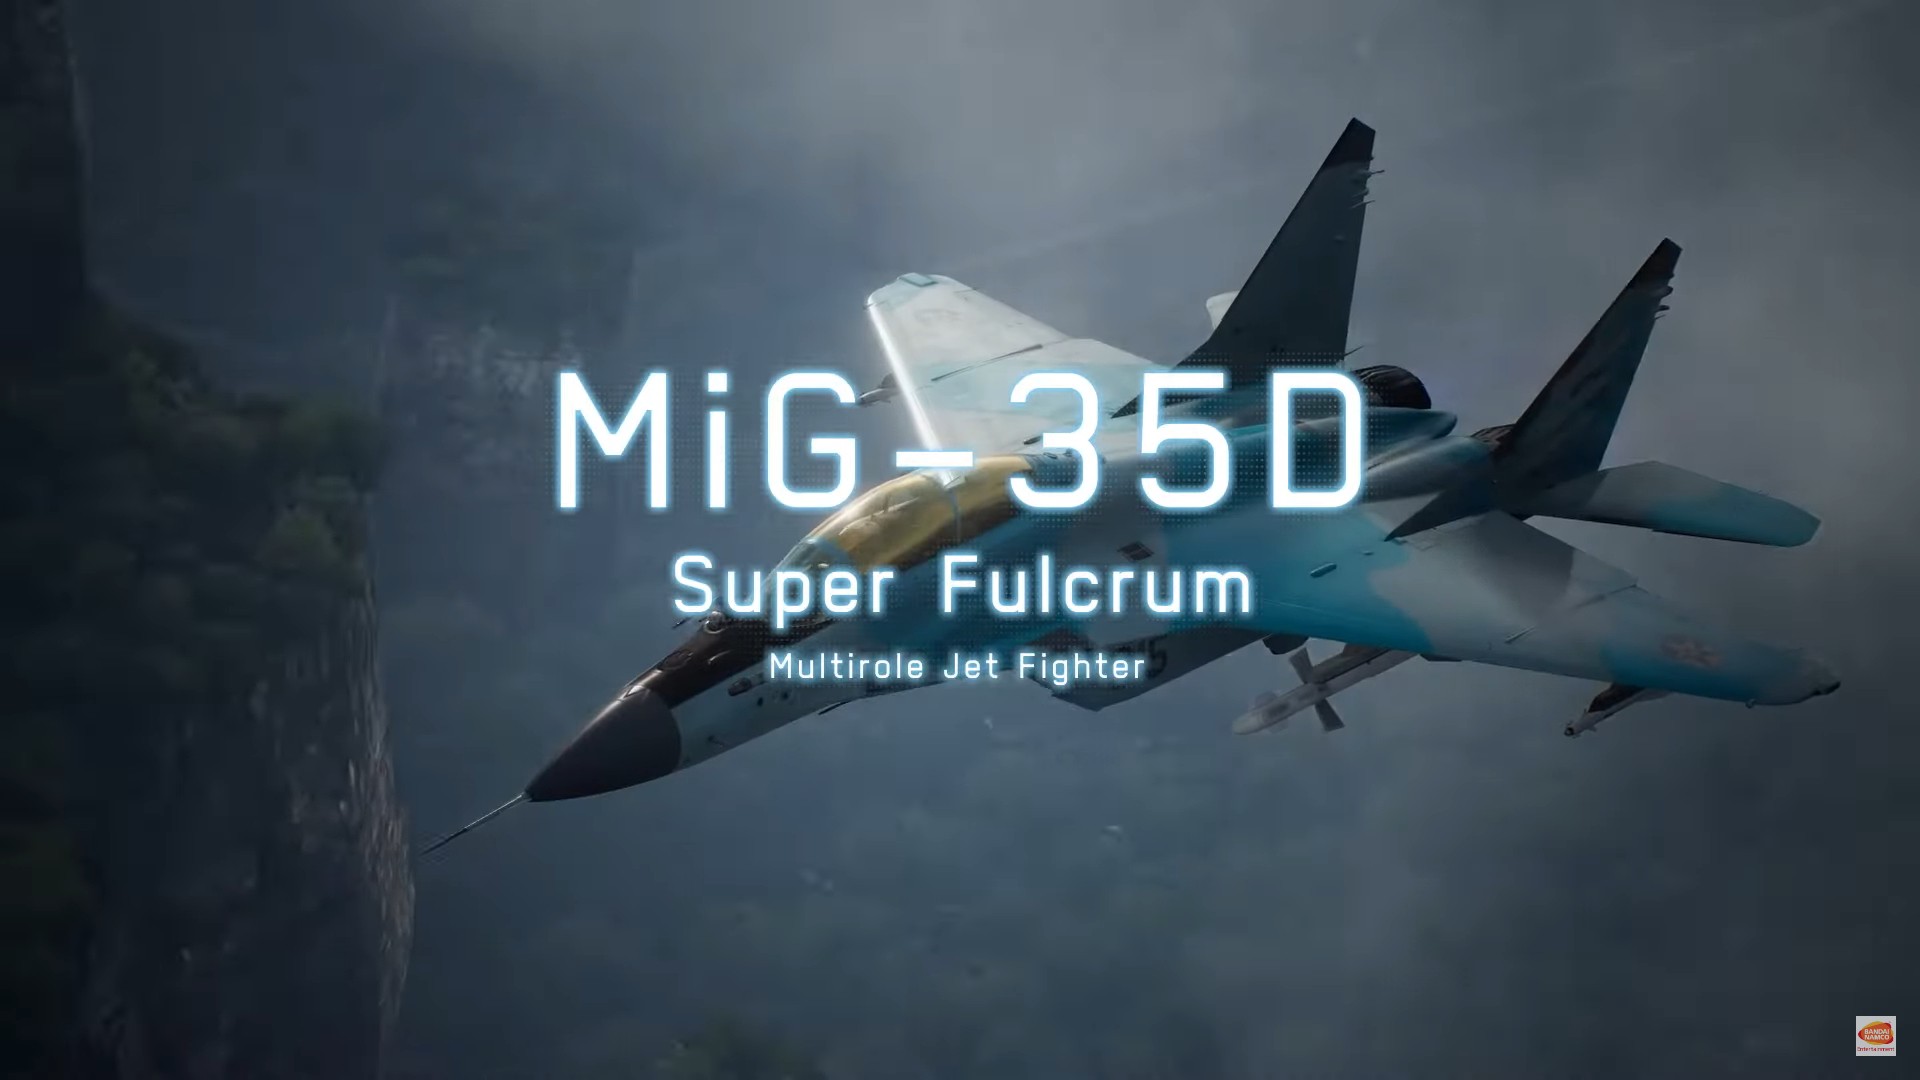 Take to the skies once more with Ace Combat 7's Cutting-edge Aircraft  Series DLC